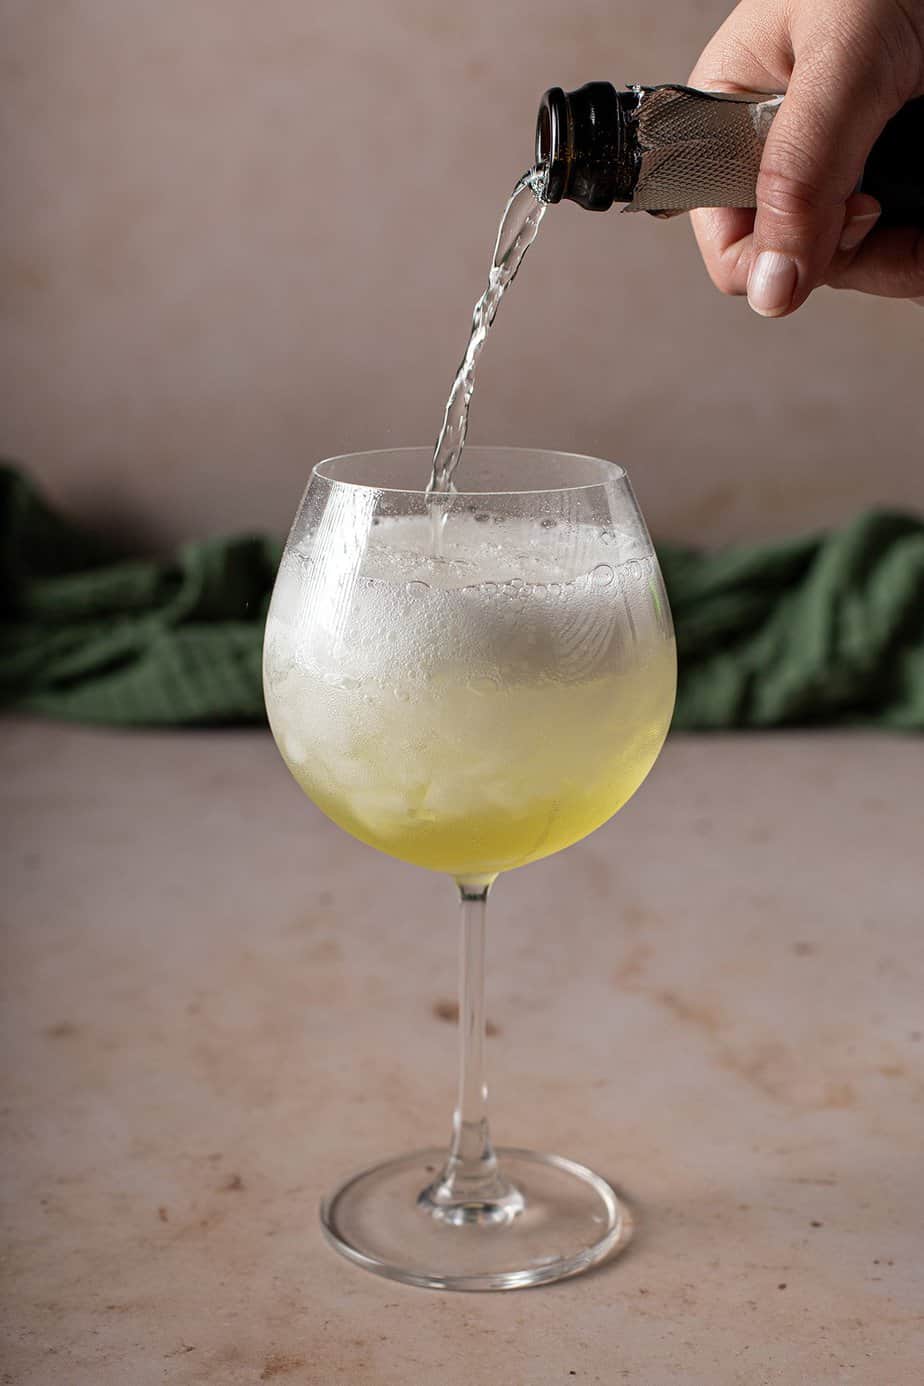 large wine glass filled with crushed ice and some limoncello, prosecco is being poured into it